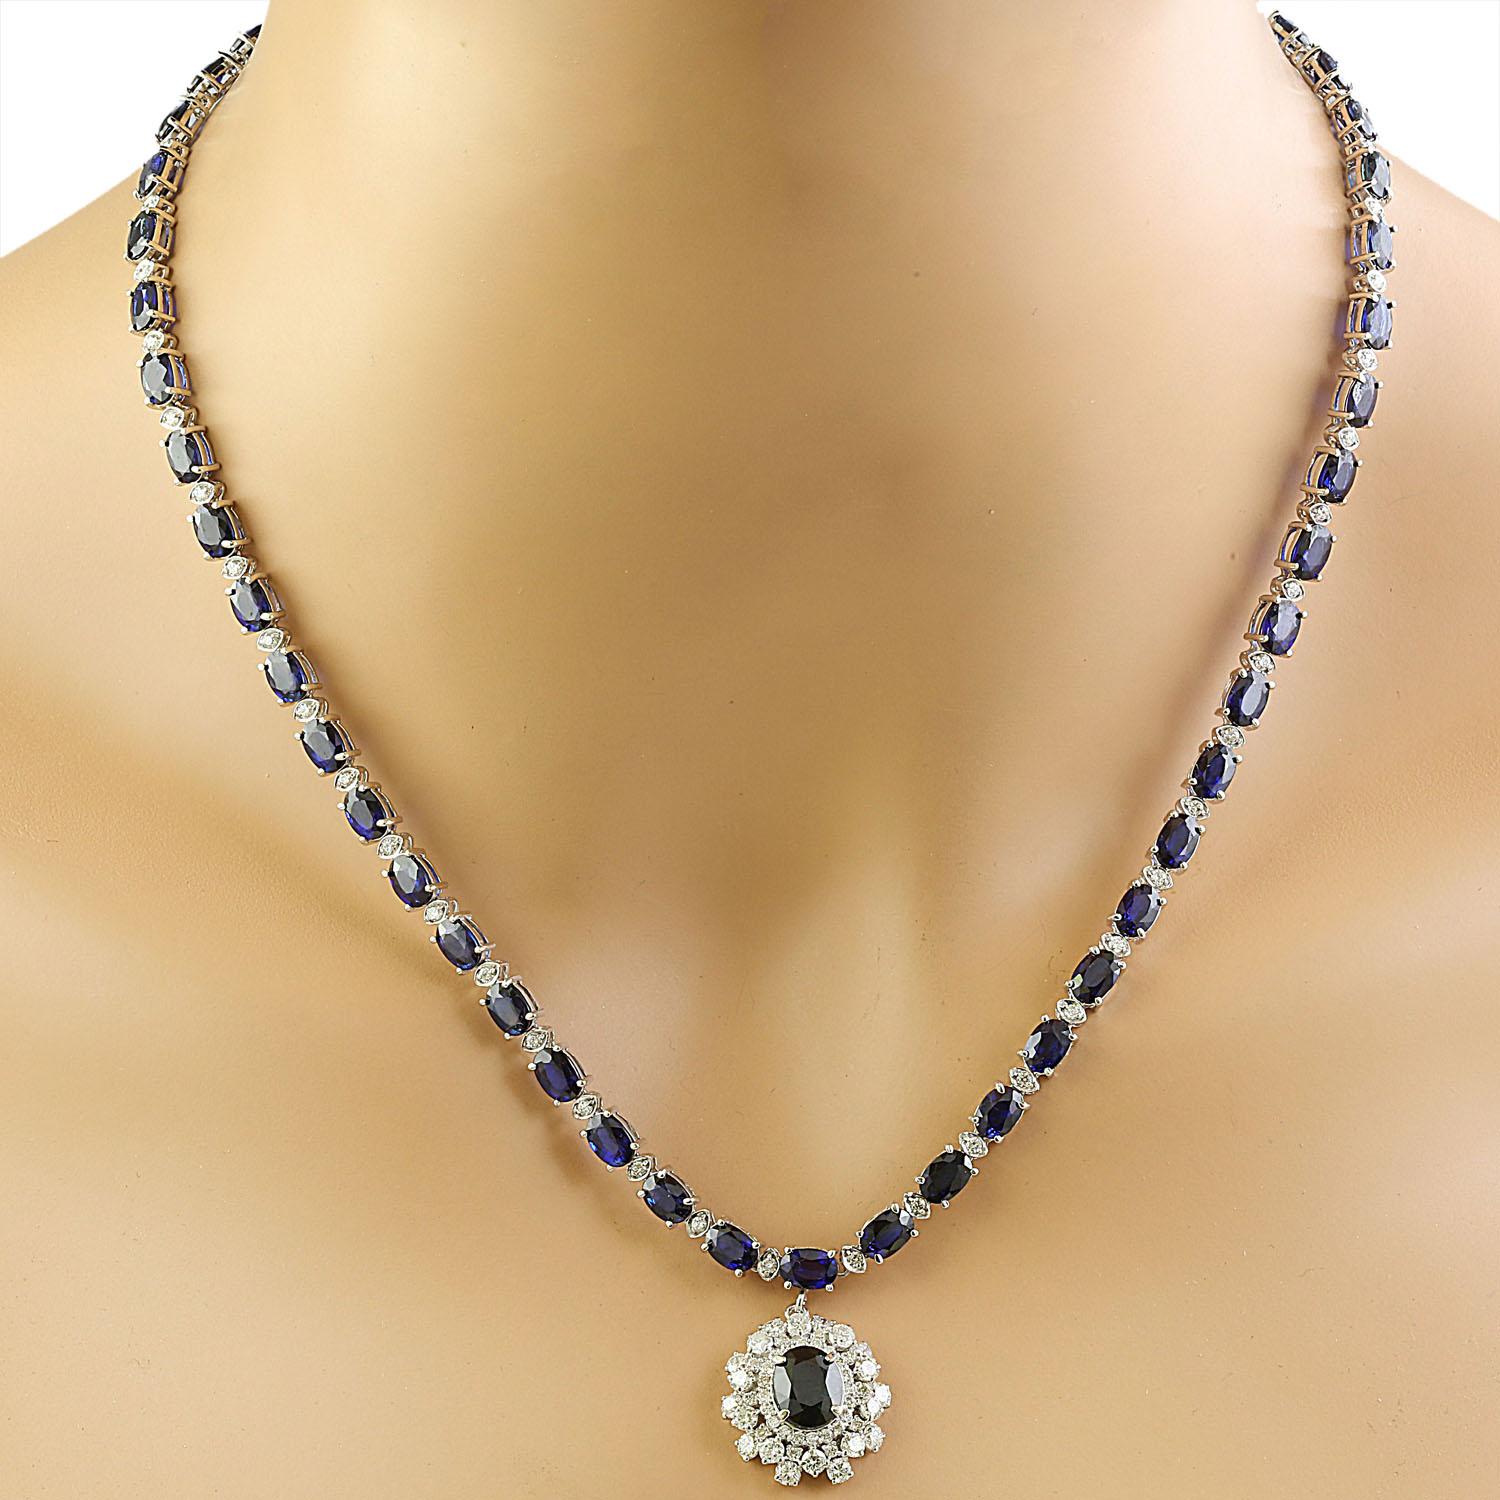 38.80 Carat Natural Sapphire 14 Karat Solid White Gold Diamond Necklace
Stamped: 14K
Total Necklace Weight: 24 Grams
Necklace Length: 18 Inches
Center Sapphire Weight: 2.61 Carat (9.00x7.00 Millimeters)
Side Sapphire Weight: 32.89 Carat (6.00x4.00